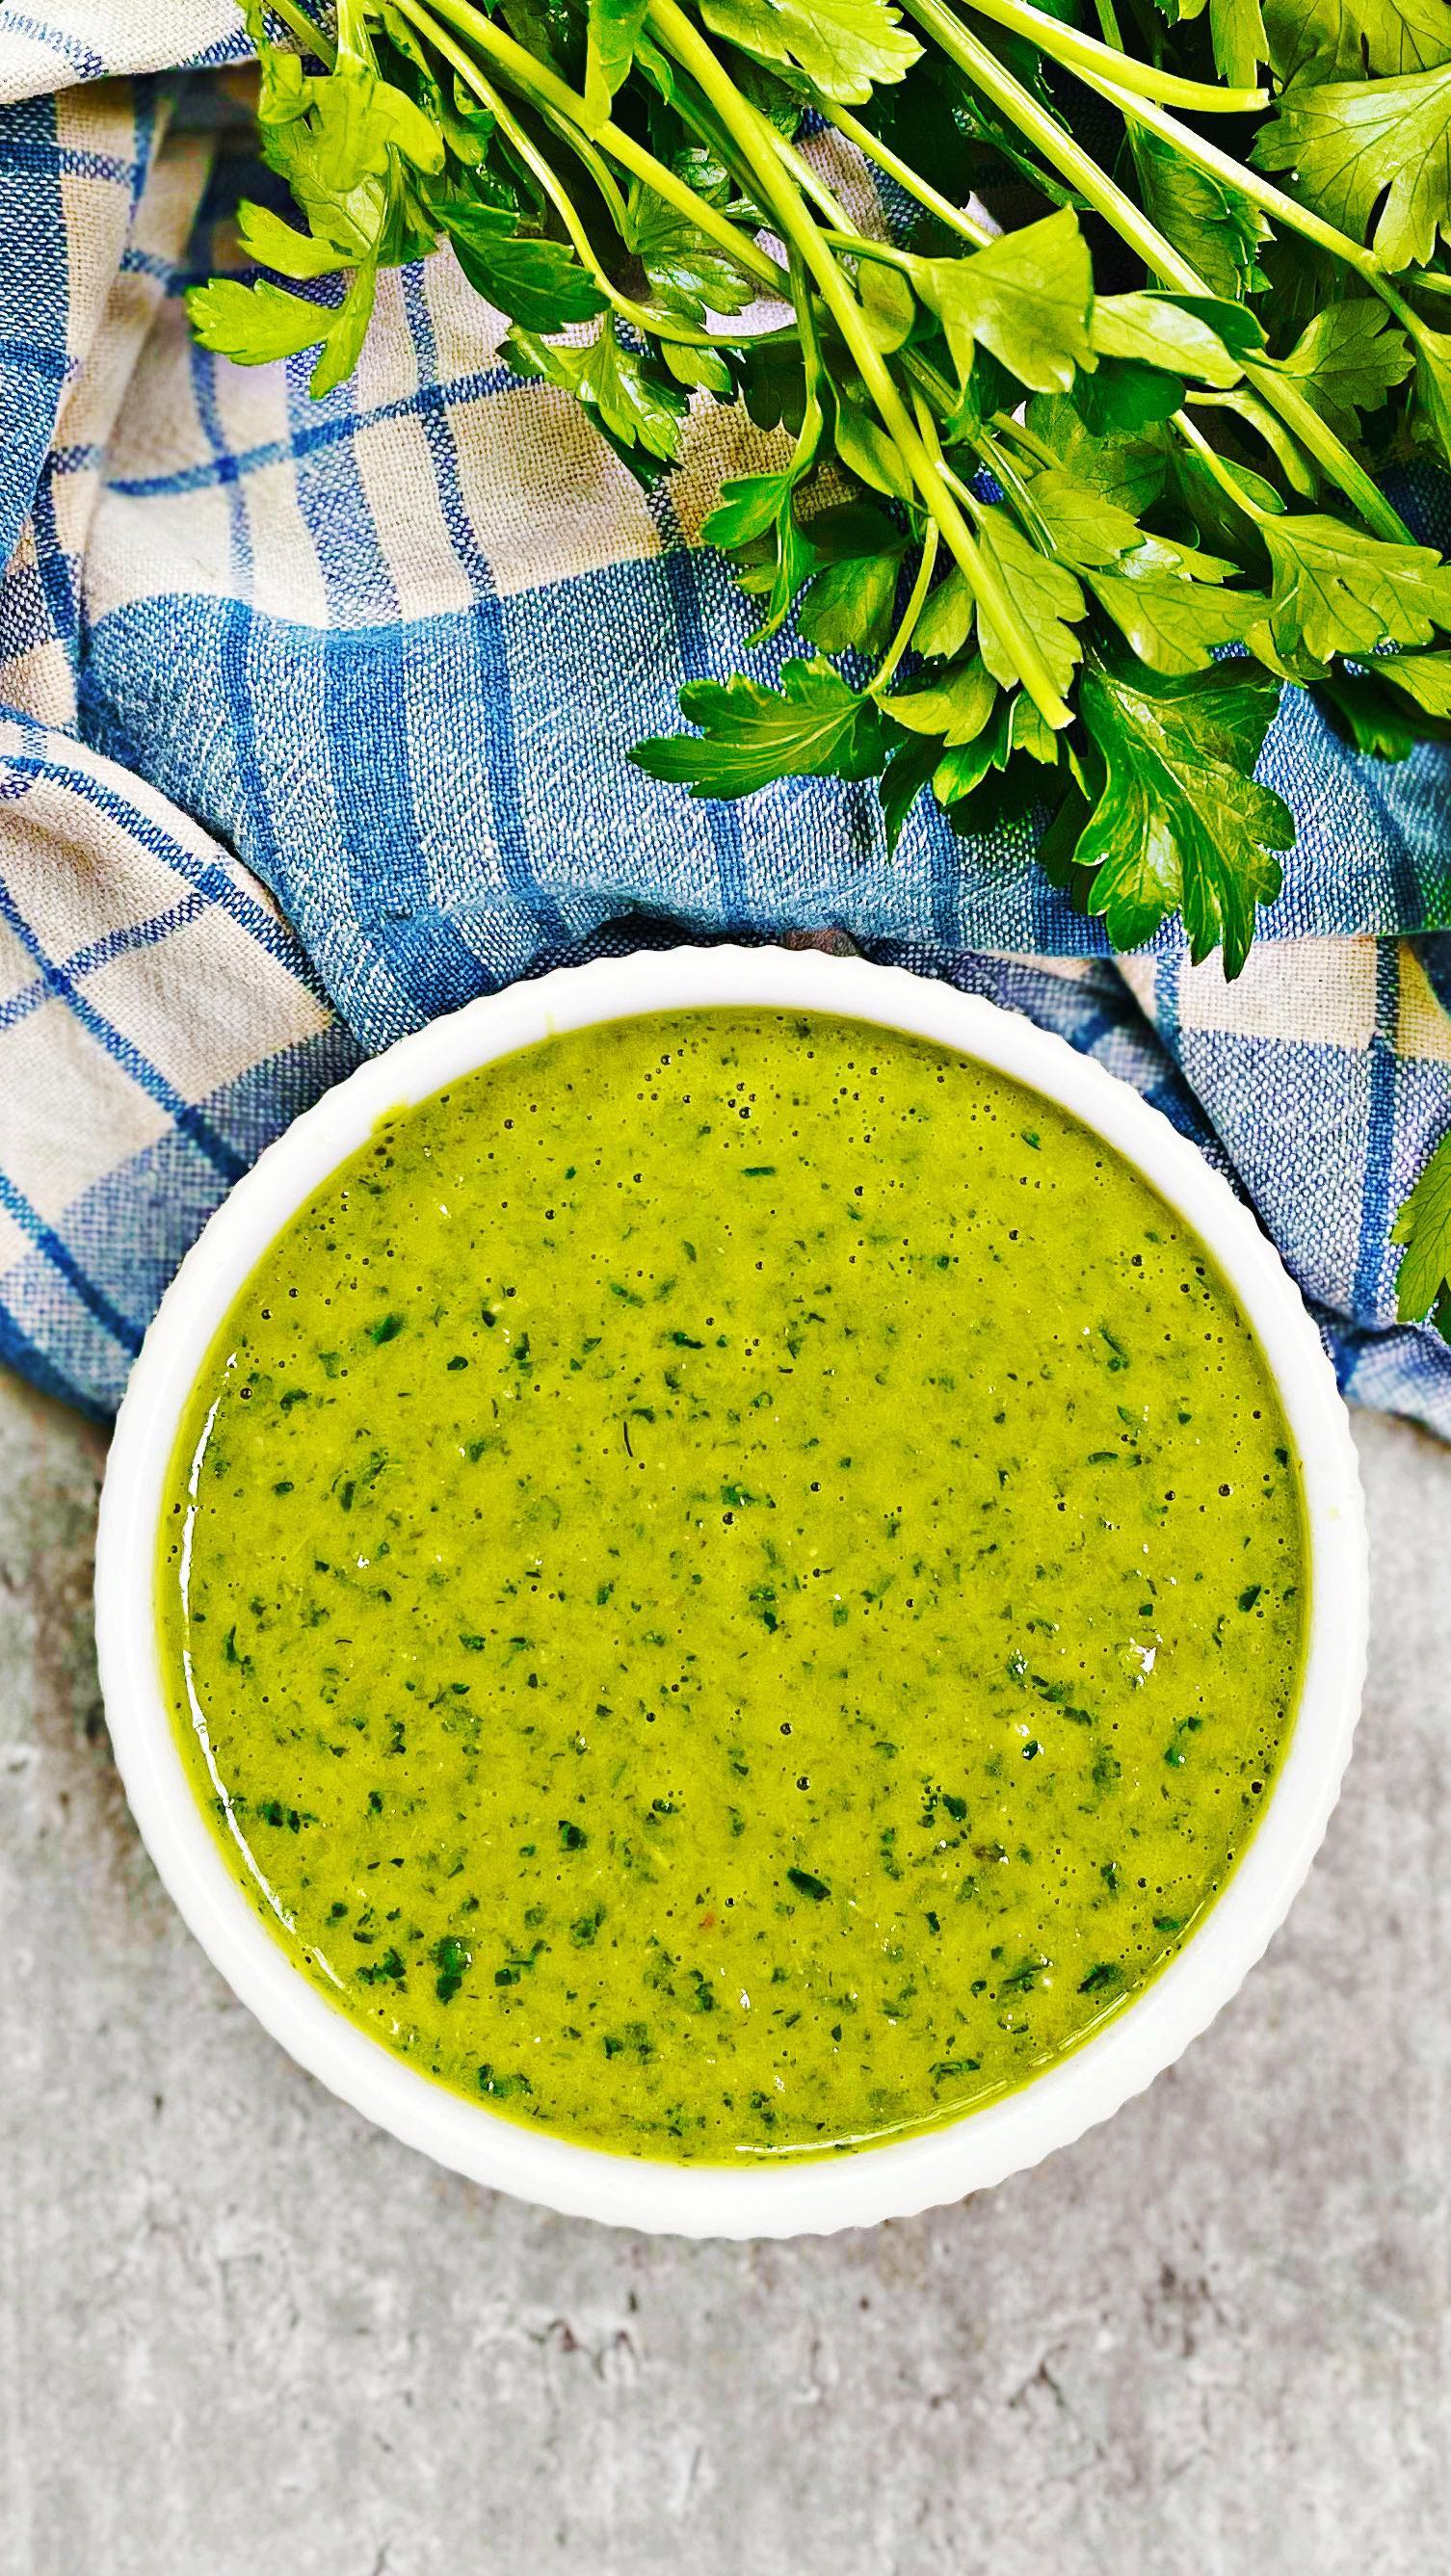 Follow @dinnerreinvented for more recipes like this easy chimichurri sauce. I spoon it over steak, yes, but it’s also a great marinade for chicken, spread on a sandwich, or dipping sauce for roasted potatoes! Full recipe now up on the DR site #chimichurri #chimichurrisauce #steak #dippingsauce #grilling #grillingseason #herbsandspices #foodblogger #momblogger #roniproter #dinnerideas #dinnerrecipes #dinnerreinvented